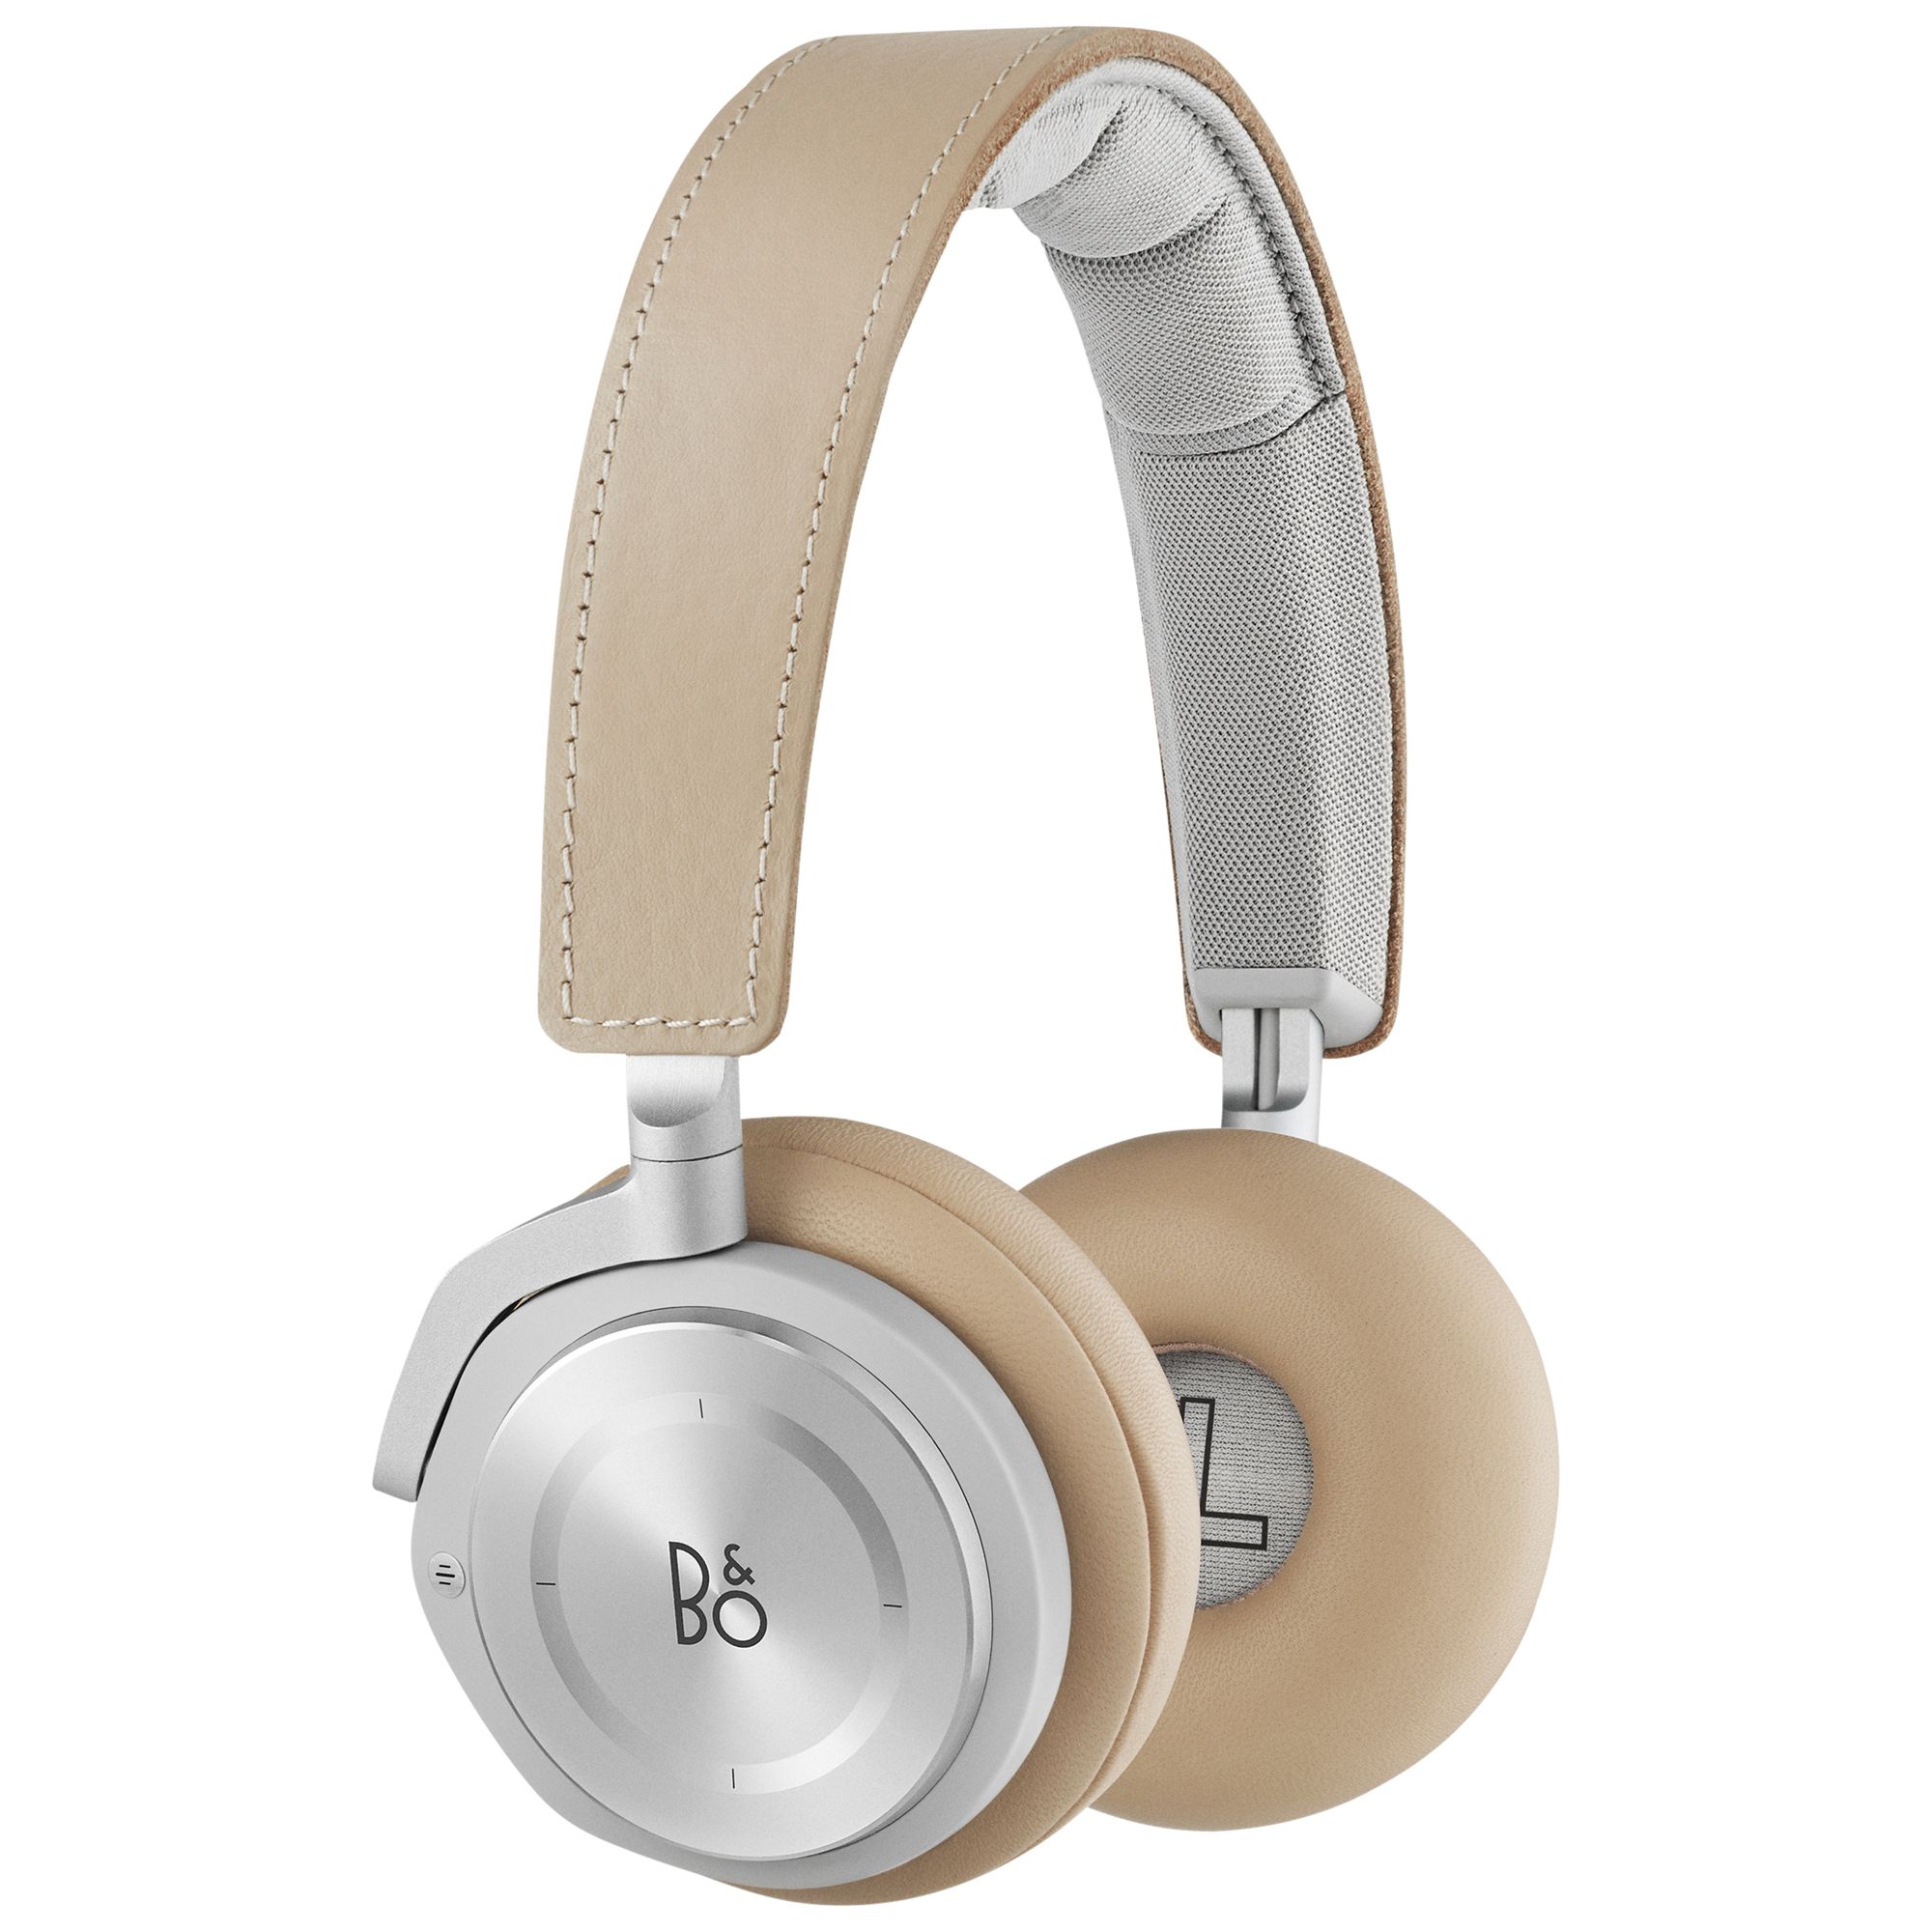 Bang & Olufsen Beoplay H8 Wireless Bluetooth Active Noise Cancelling On-Ear Headphones with Intuitive Touch Controls